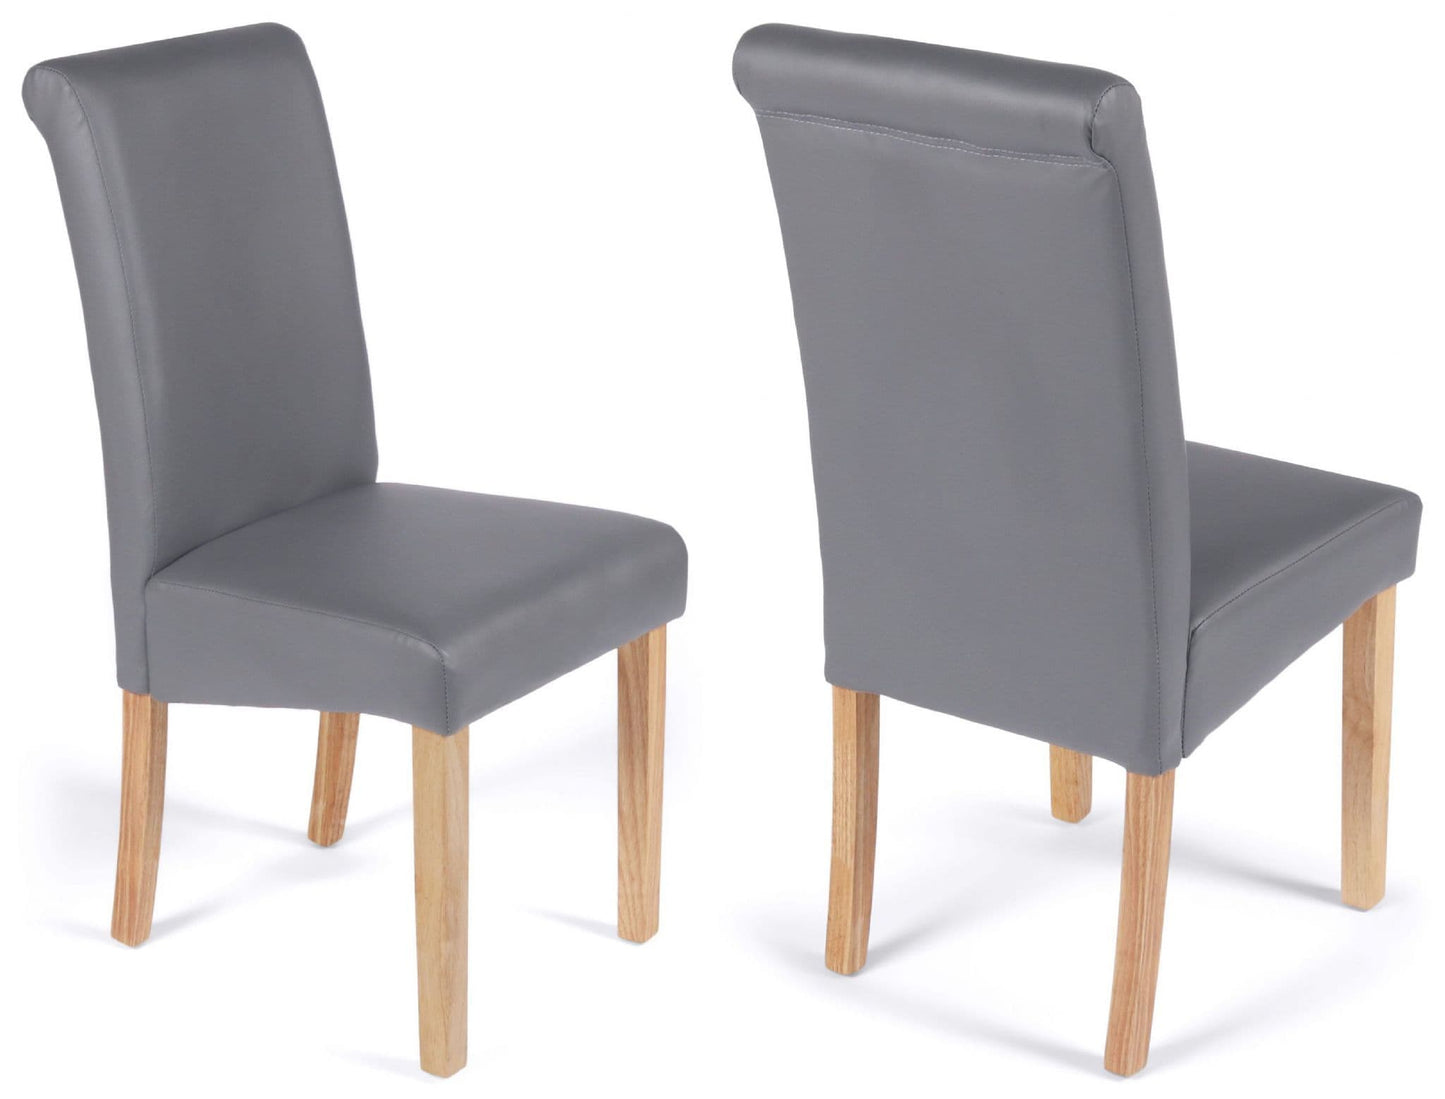 2 York Grey Faux Leather Chairs with Oak Legs 1/2 Price Deal